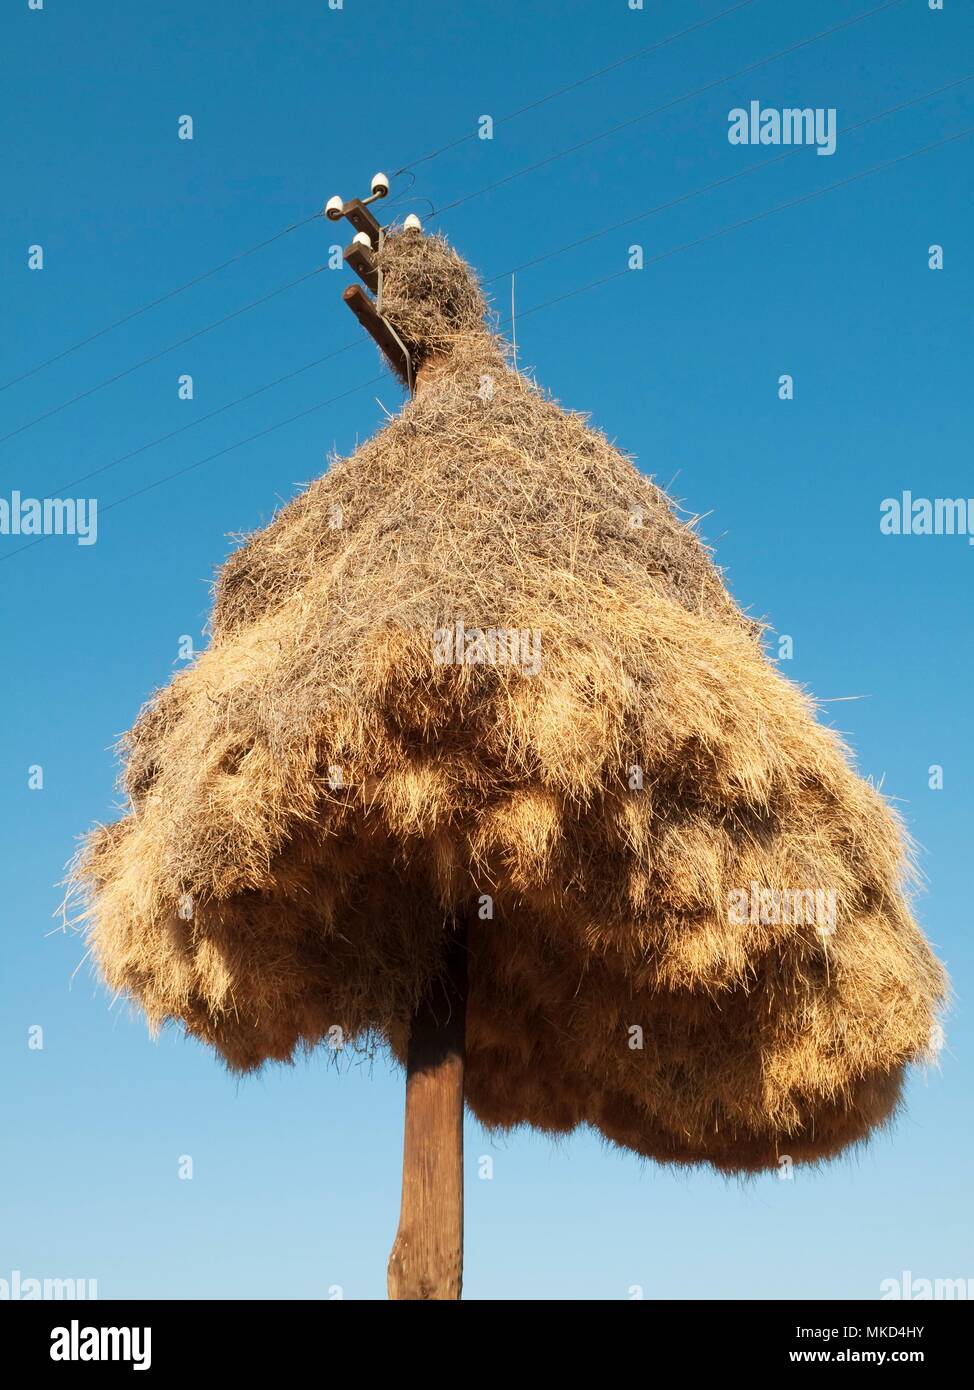 Huge communal nest of Sociable Weavers (Philetairus socius) at a telephone pole at the N14 road a few kilometers east of the town of Upington. Kalahari Desert, Northern Cape province, South Africa. Stock Photo